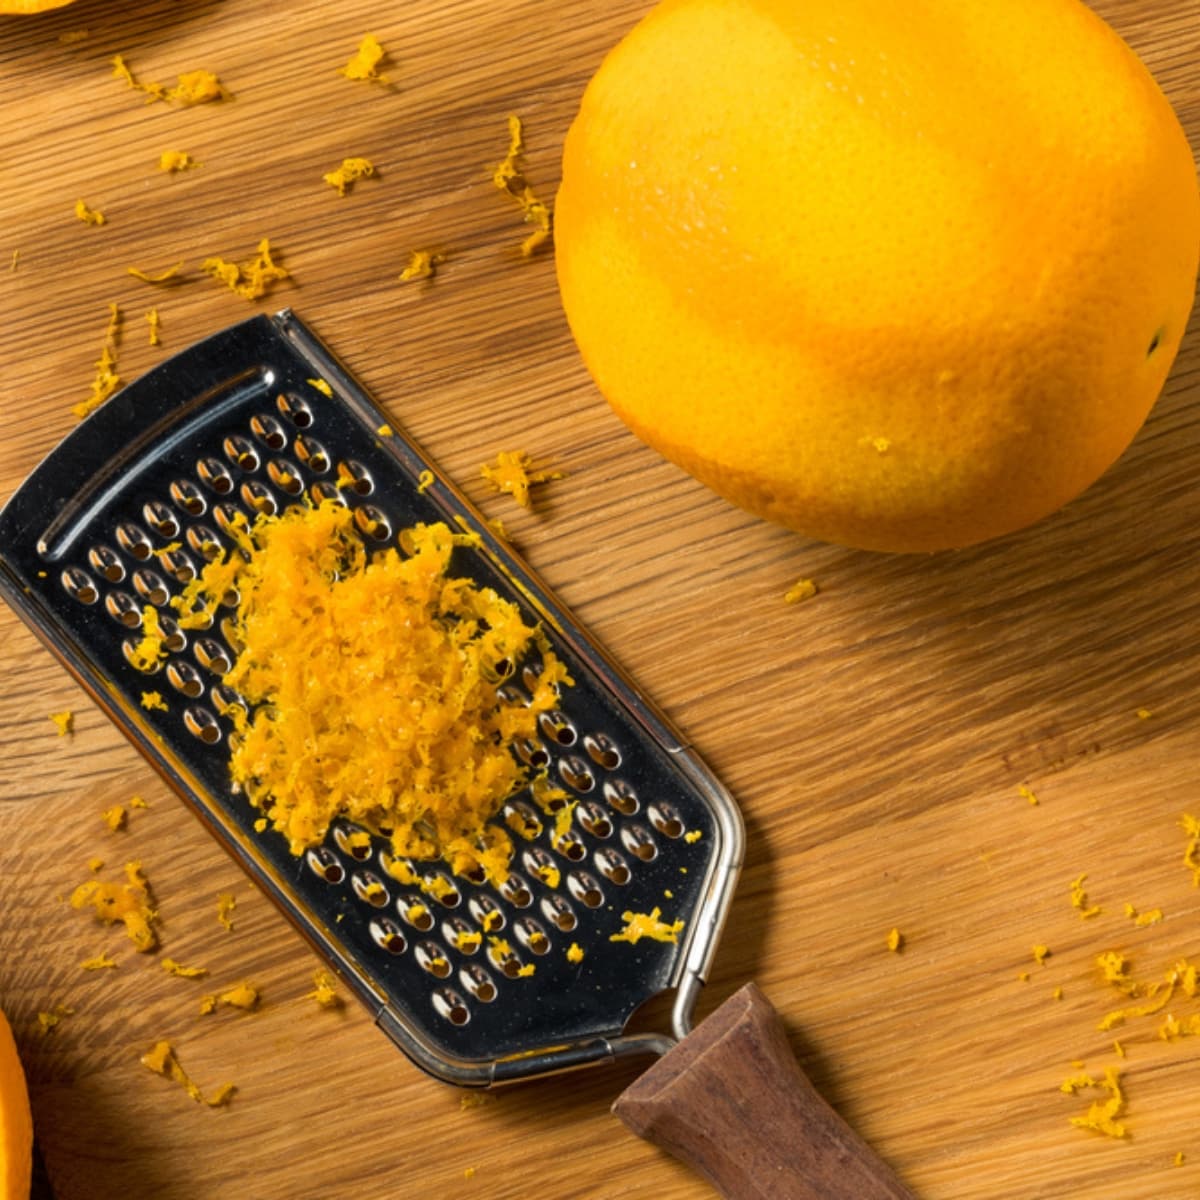 Fresh Orange, Zested With a Grater on a Wooden Cutting Board